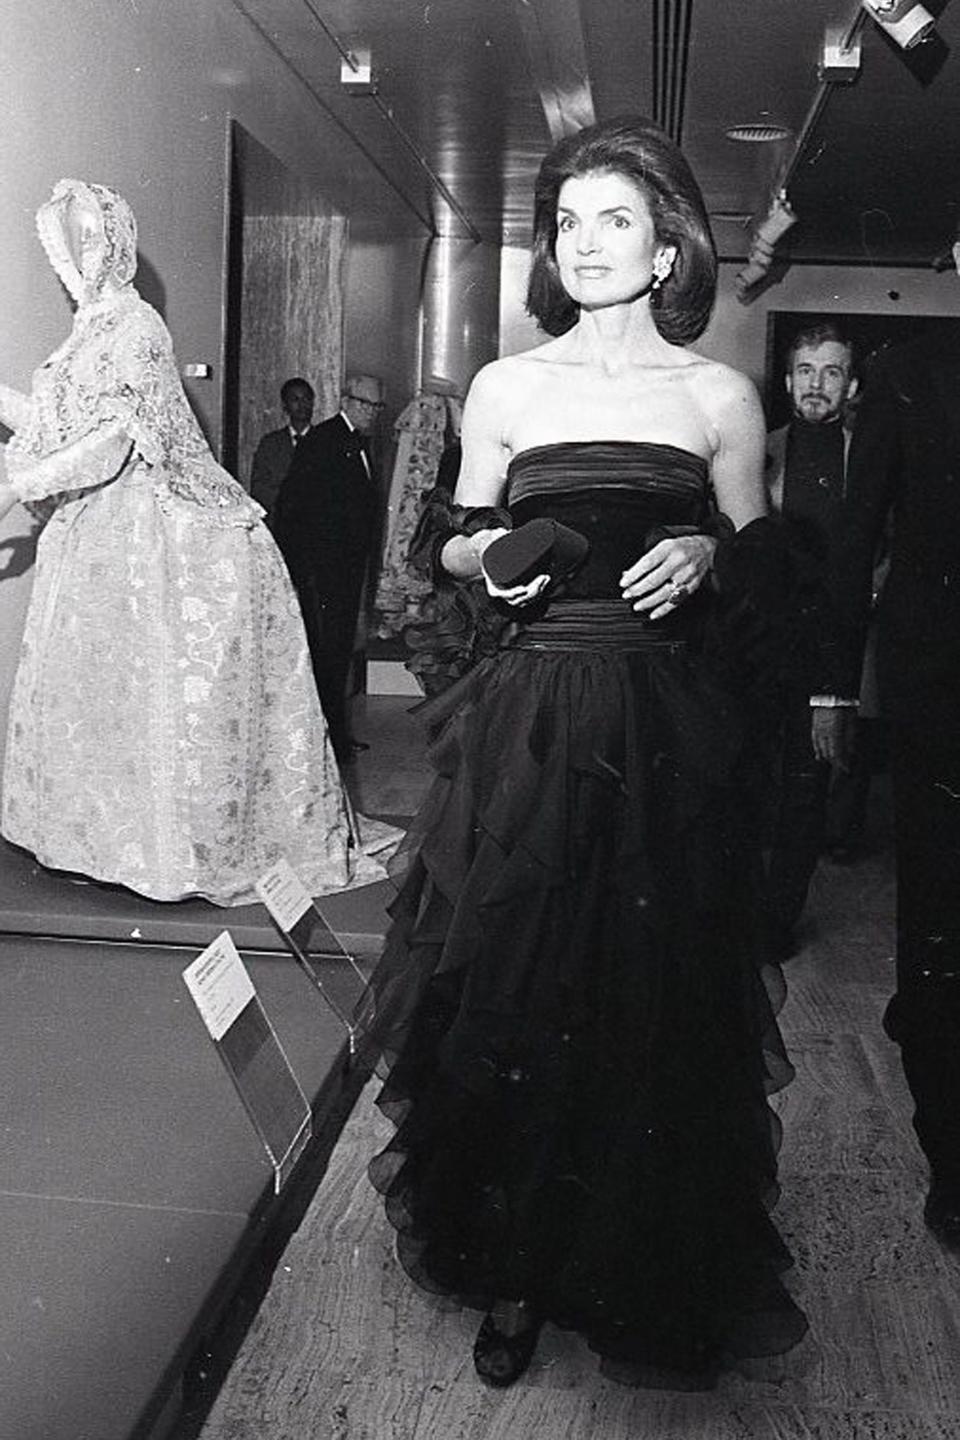 A graceful Jacqueline Kennedy walks through the galleries at the 1979 Met gala.